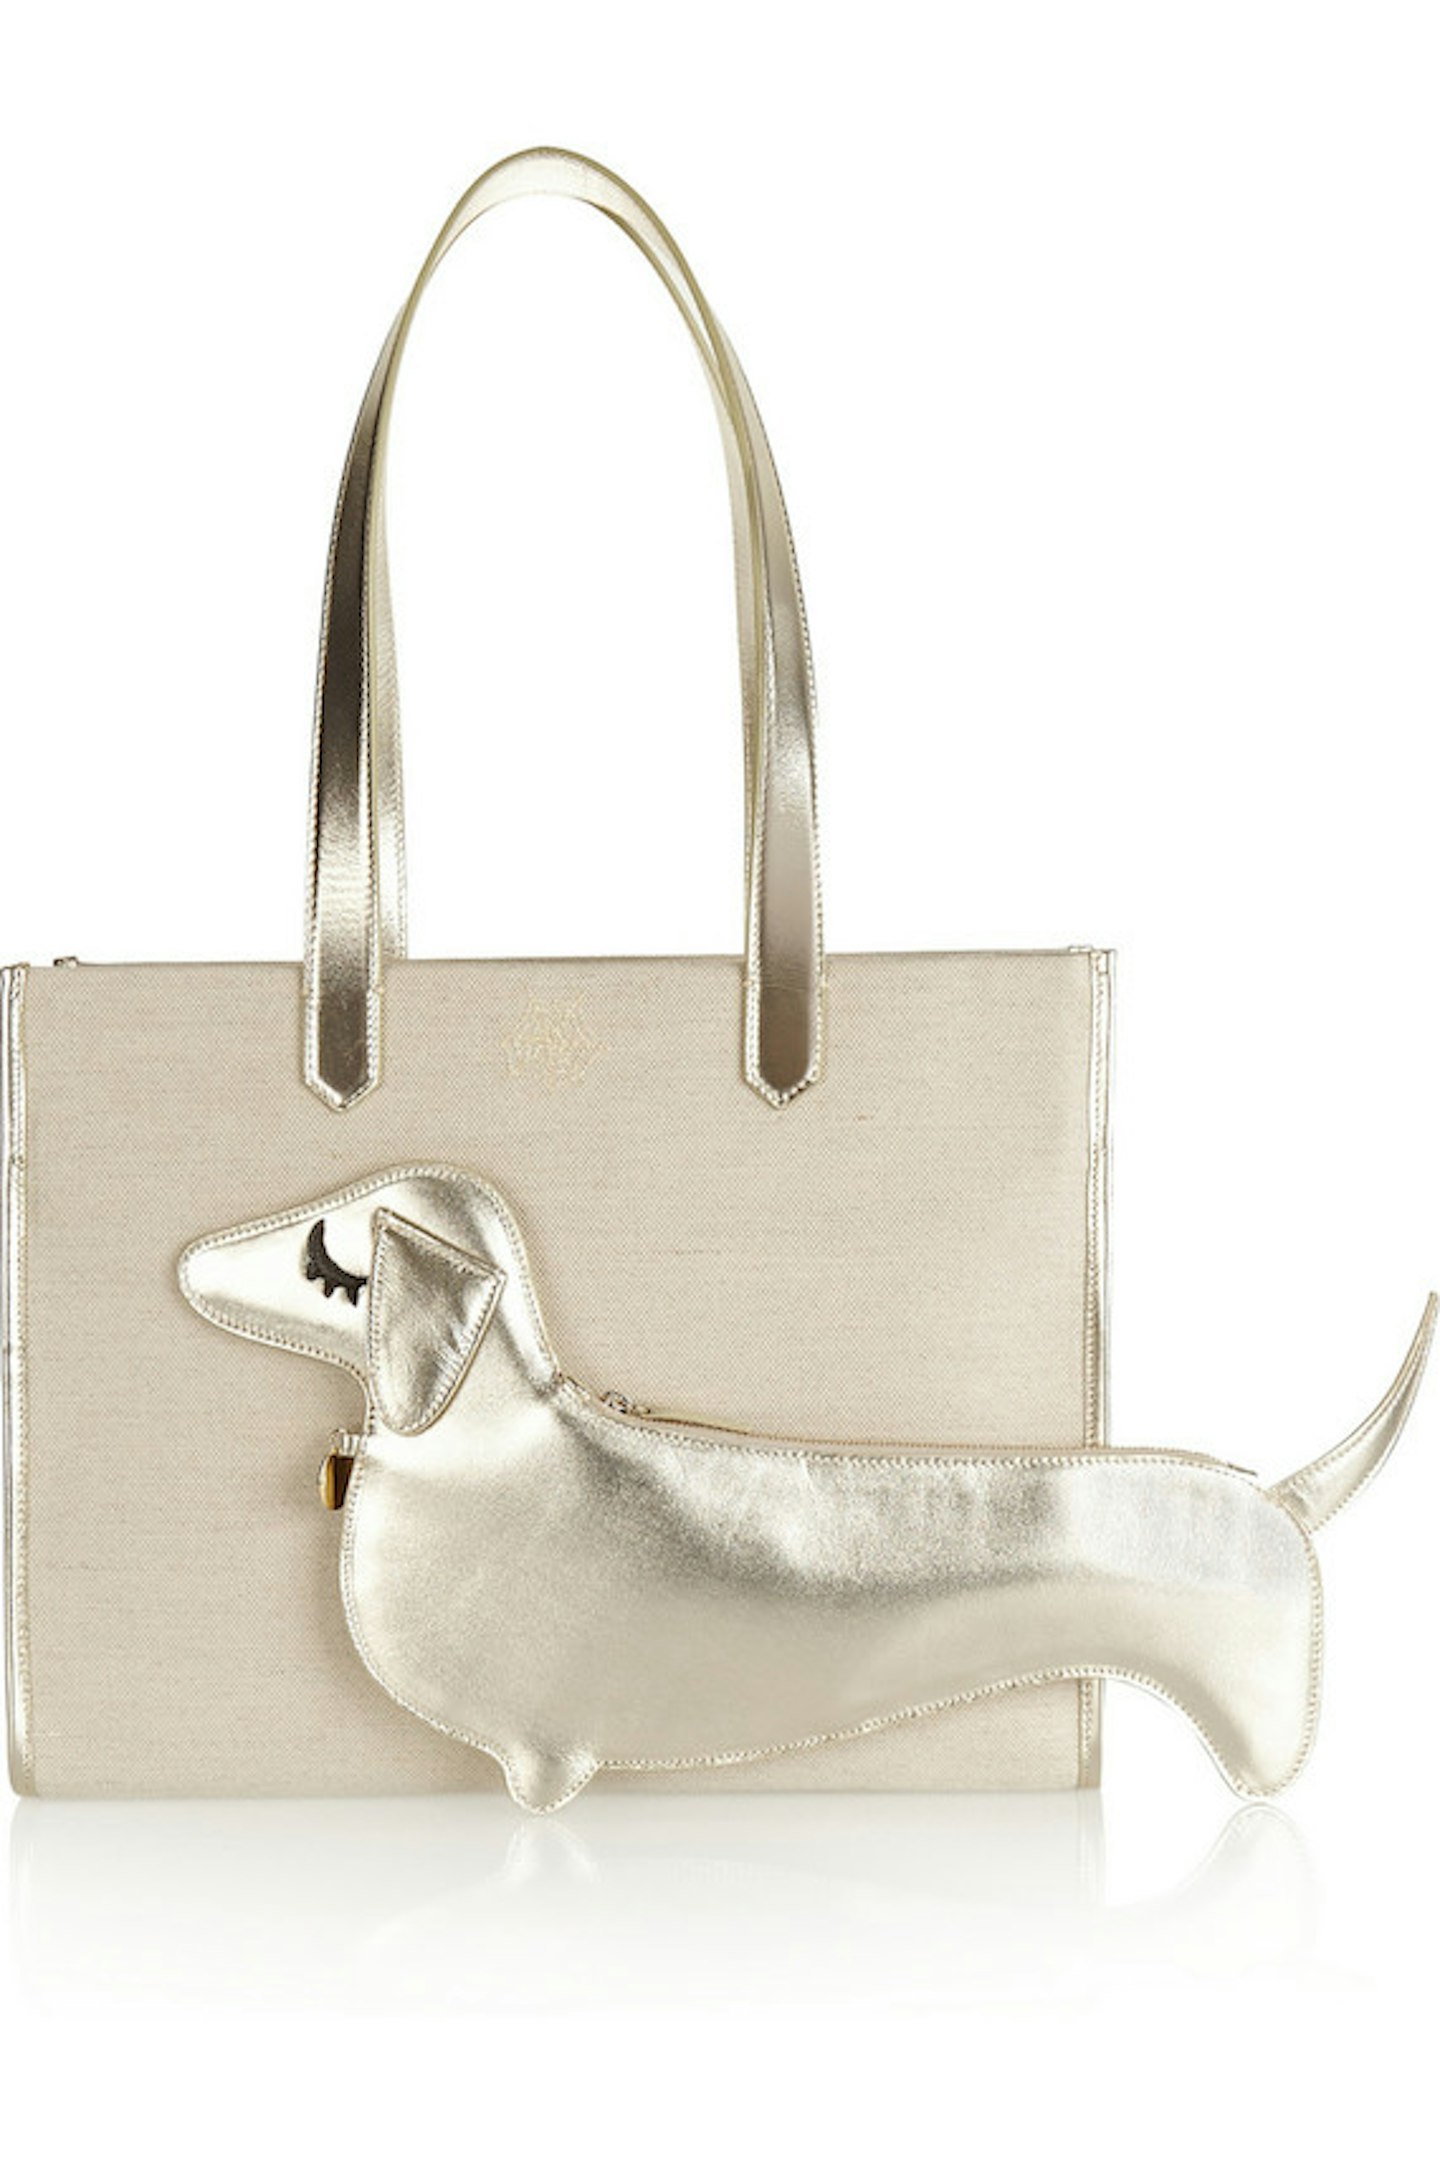 Charlotte Olympia Canvas Bag